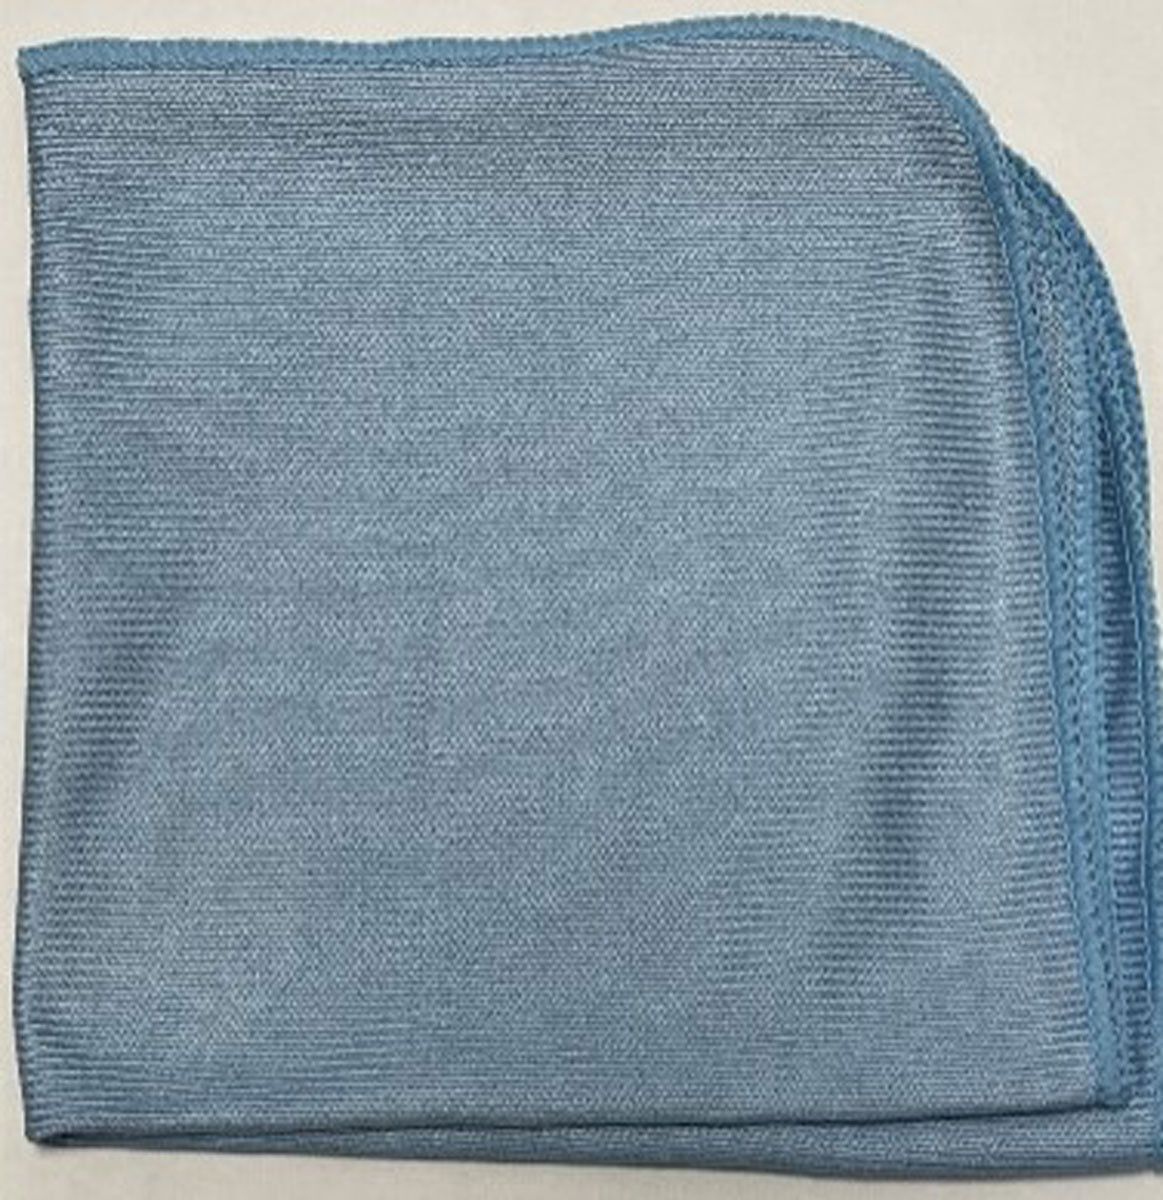 16" Corduroy Microfiber Window and Glass Cloth, 260 gsm Questions & Answers